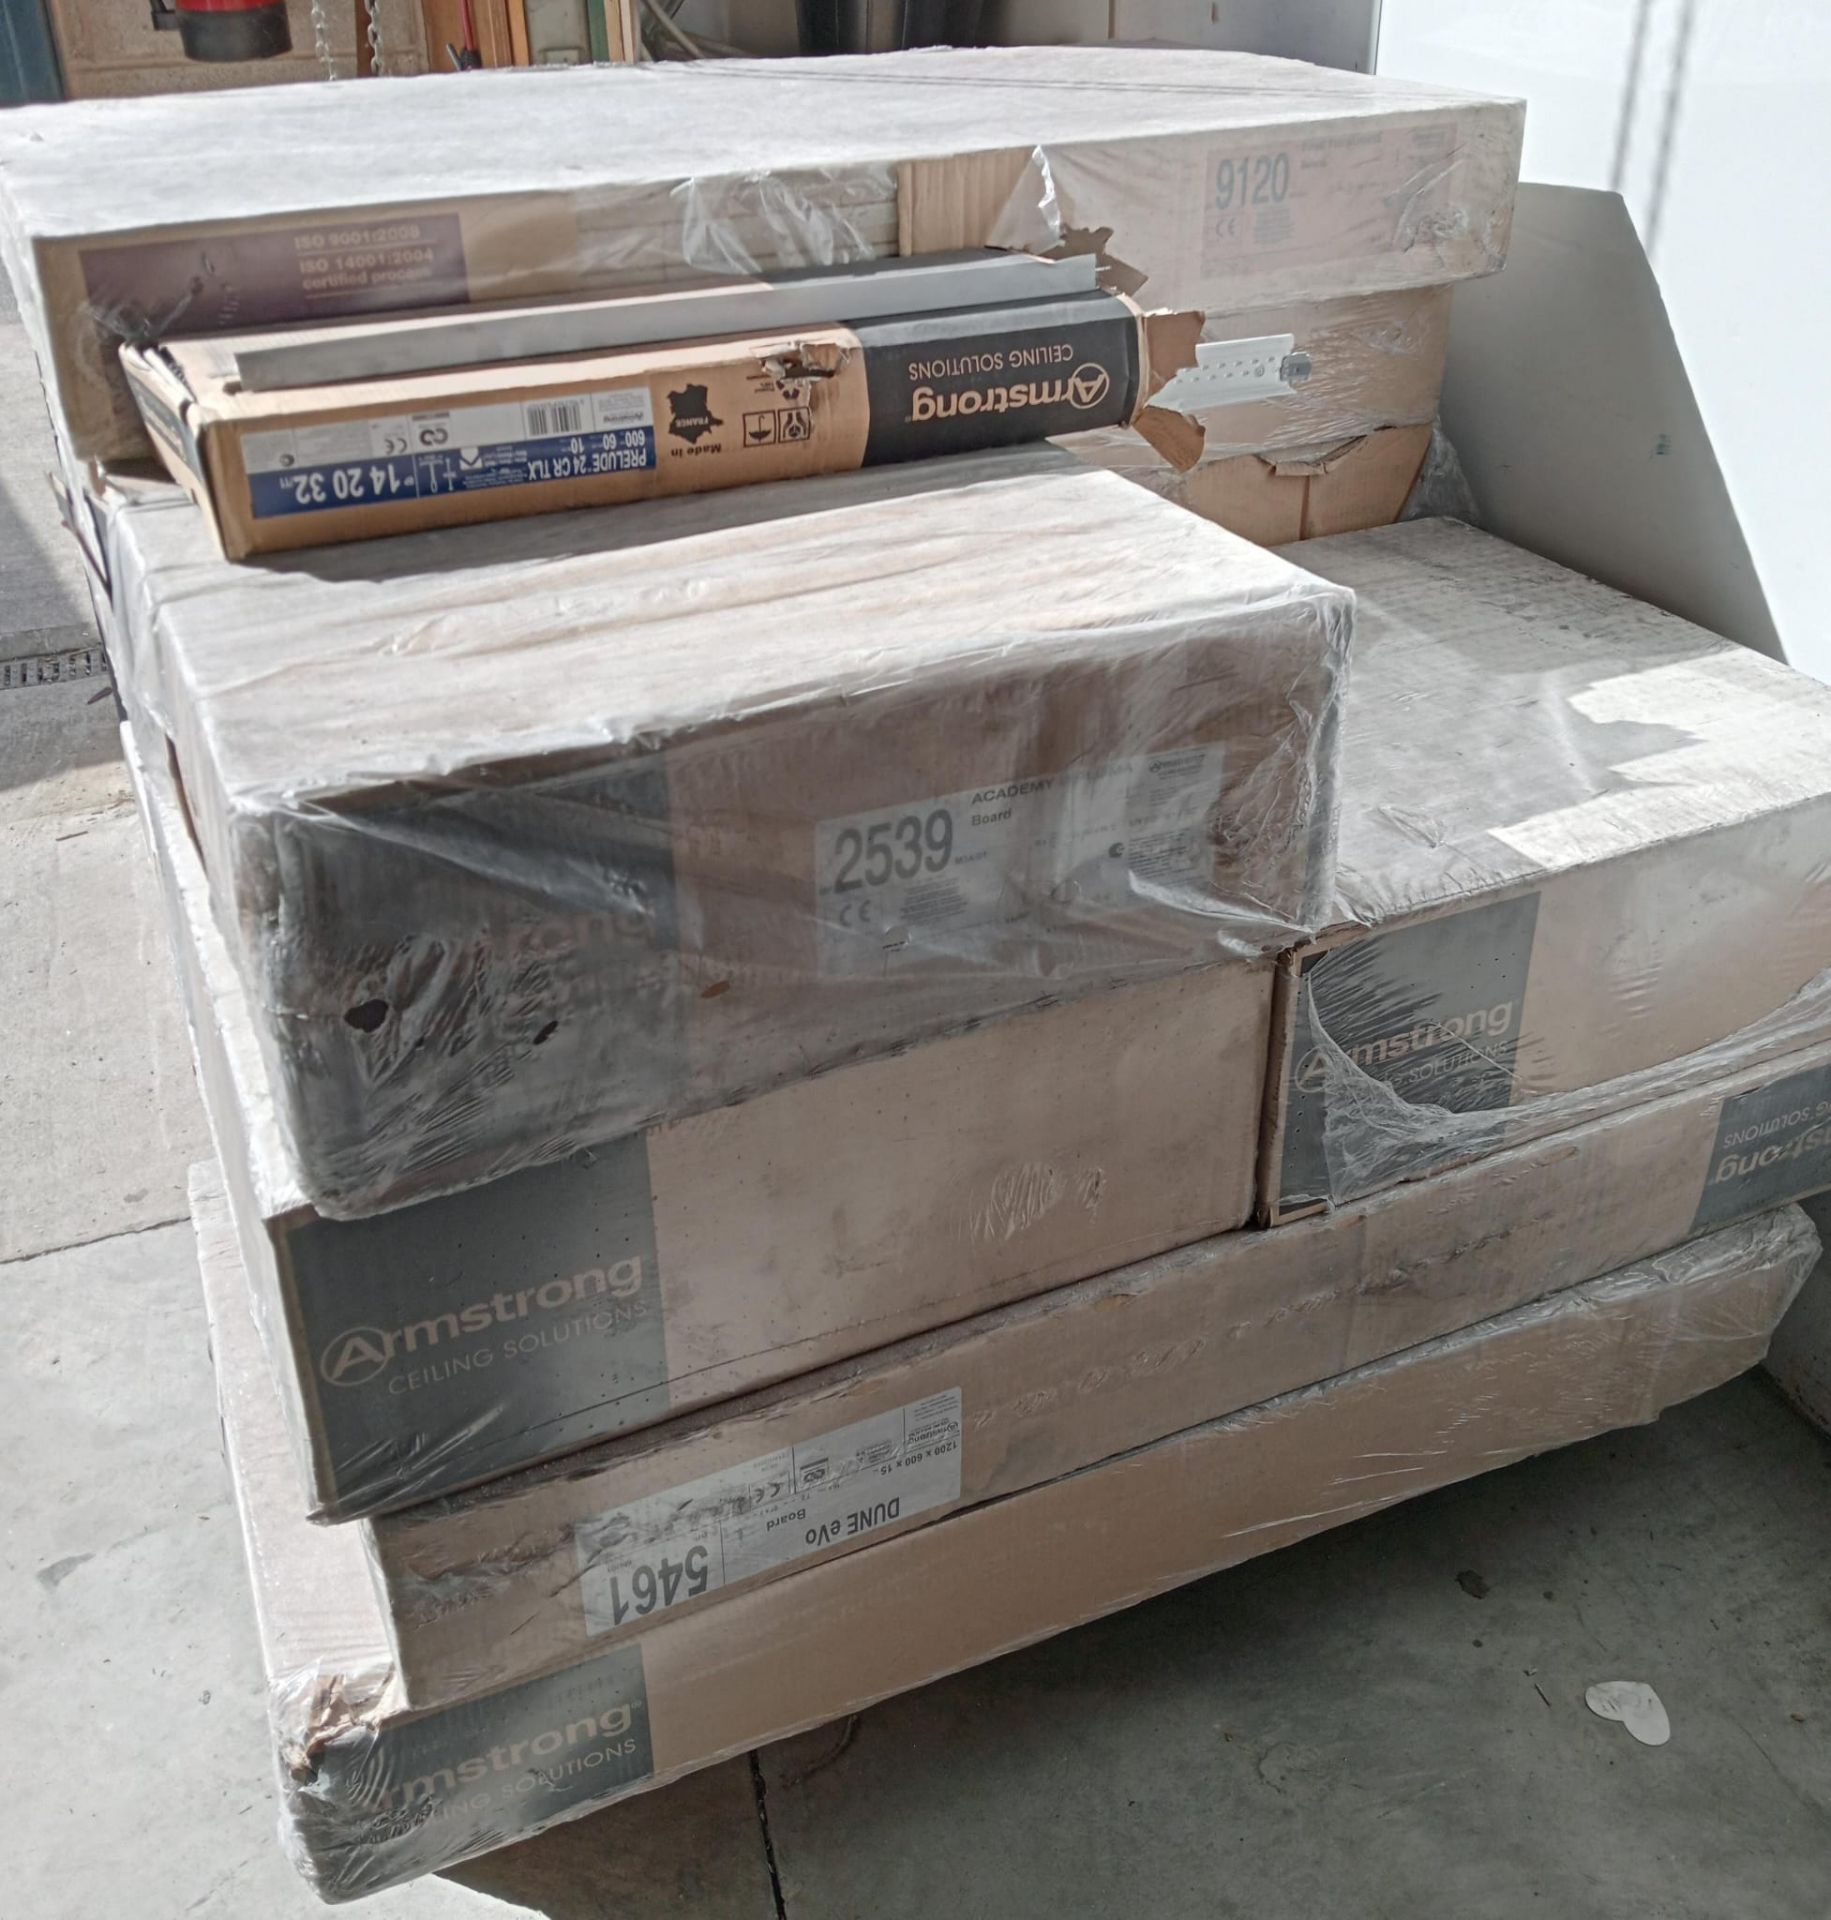 JOBLOT OF ARMSTRONG ACOUSTIC CEILING TILES INC 5461, 9120 AND 2539 - GRADE B - Image 2 of 7